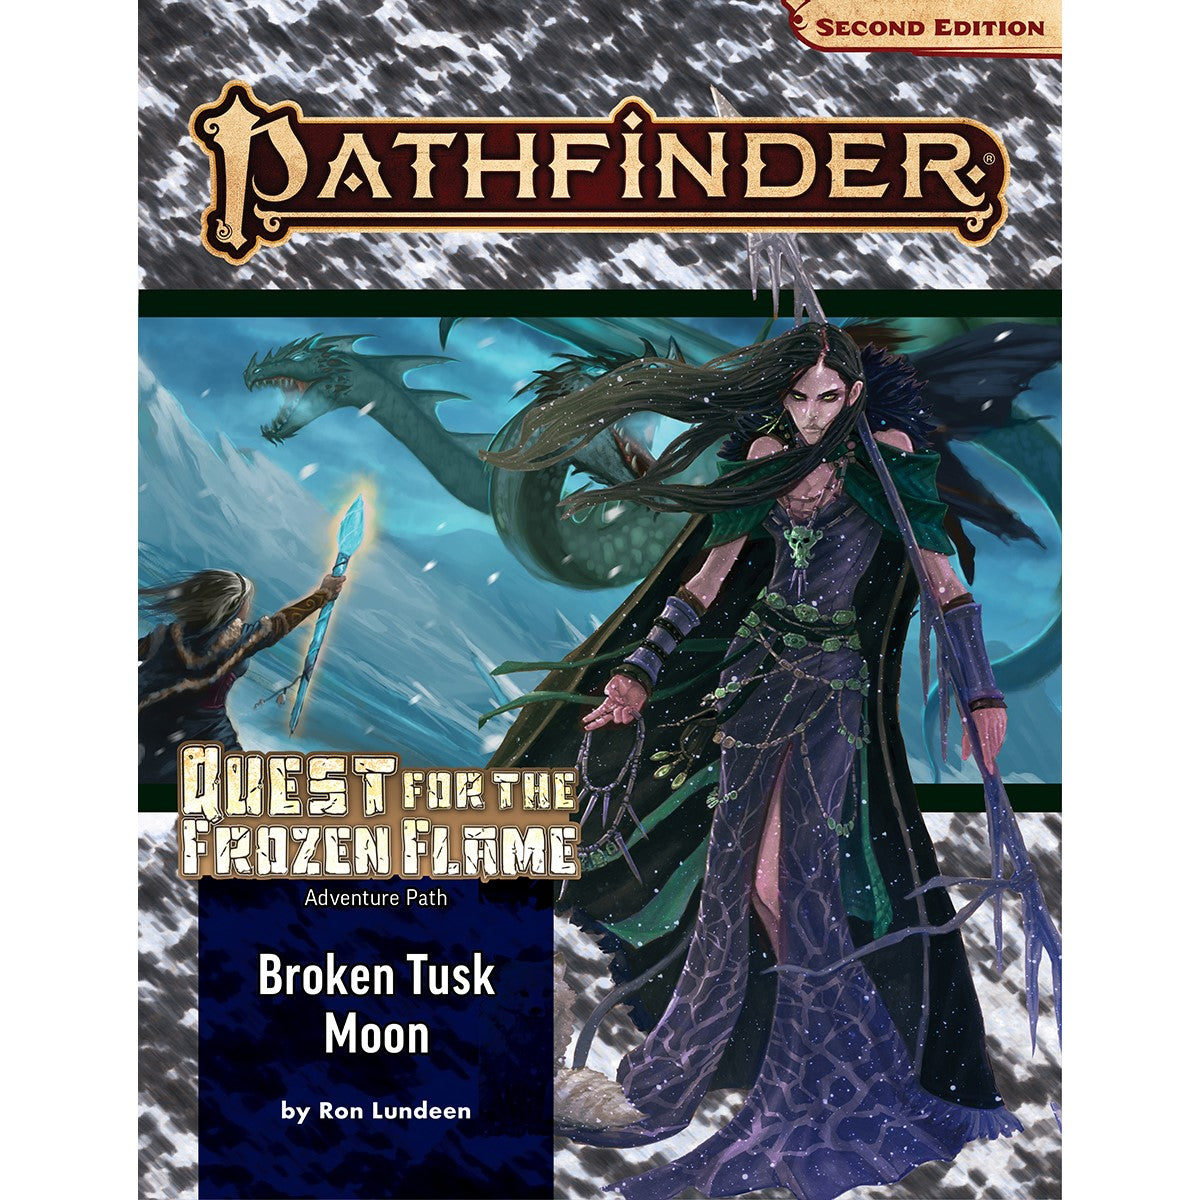 Pathfinder Second Edition Adventure Path Quest for the Frozen Flame #1 Broken Tusk Moon